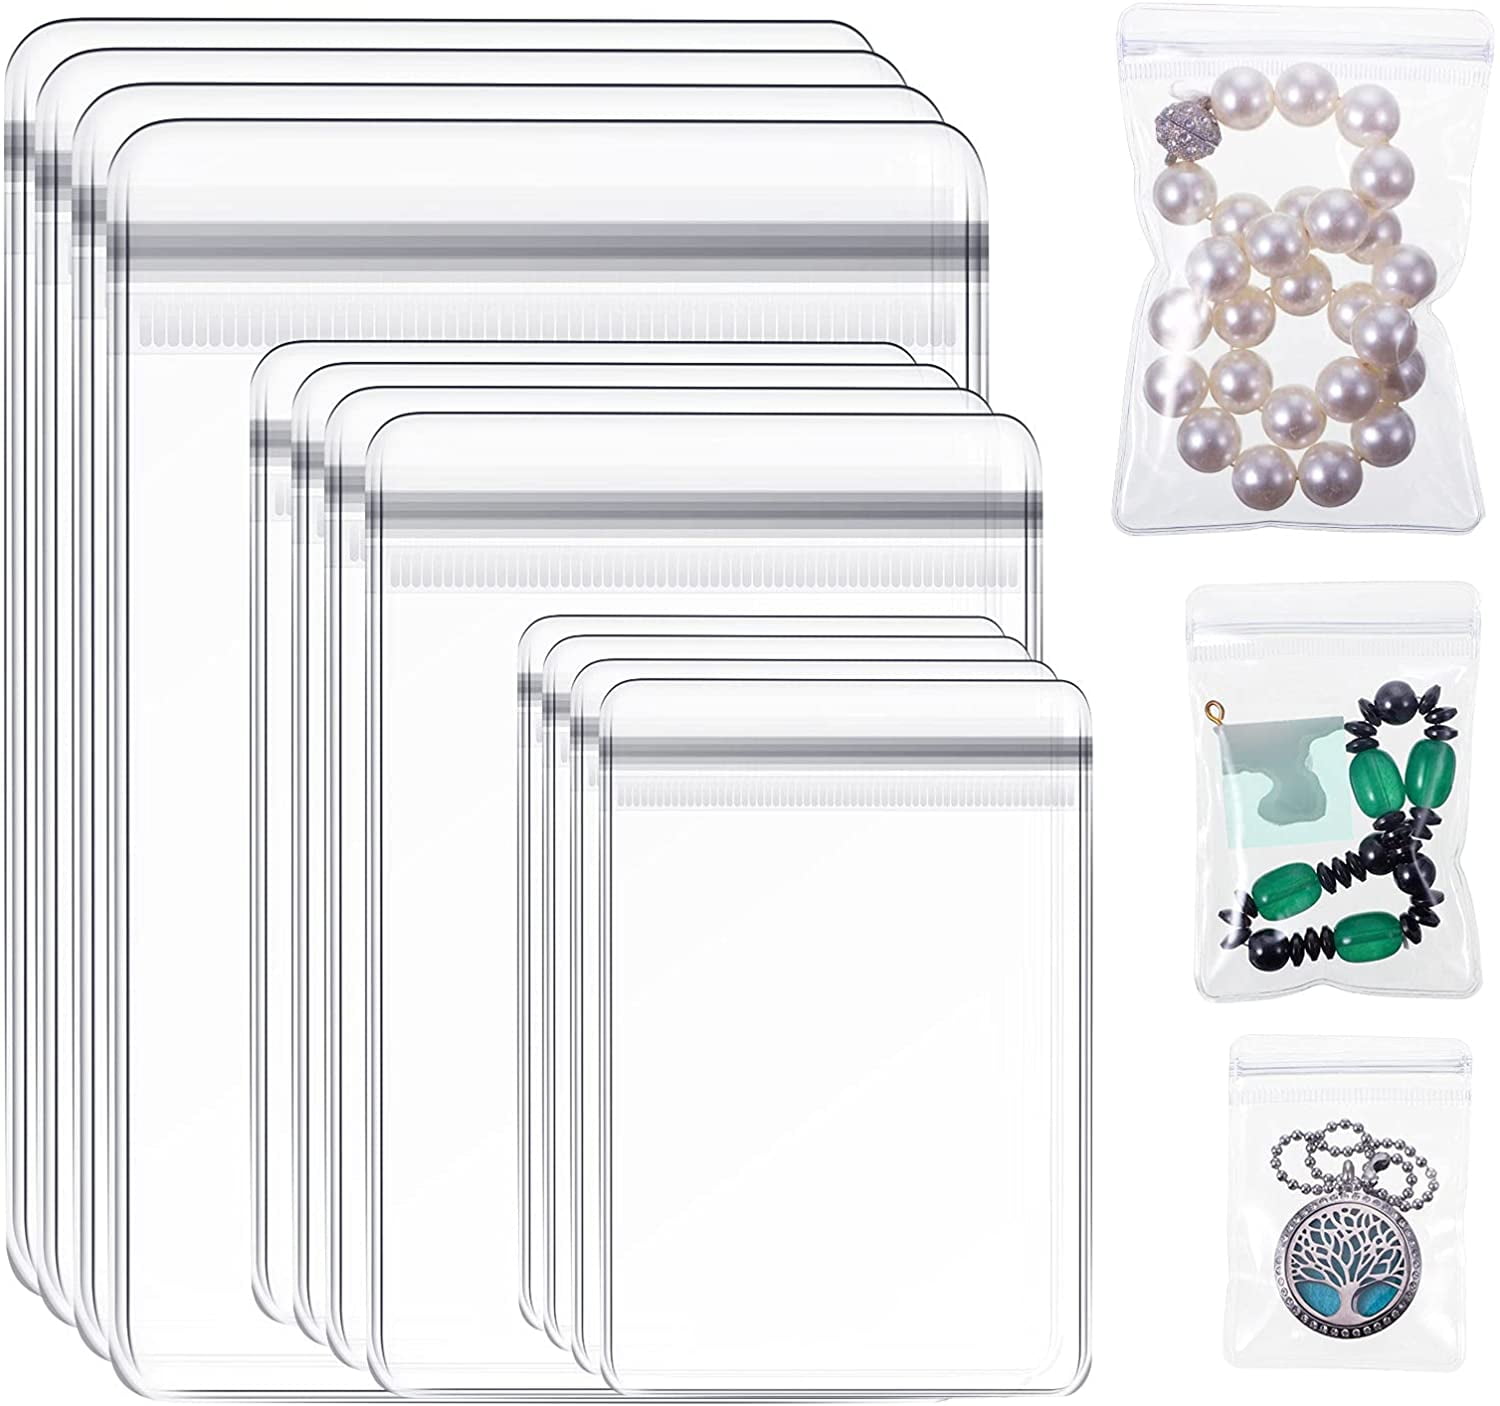  SHERCHPRY 100pcs Jewelry Storage Bag Envelope Style Packaging  Mini Zip Lock Bags Earrings Packaging Bags Resealable Bags Anti Tarnish  Jewelry Bags Small Sealed Bag PVC Accessories Organizer : Clothing, Shoes 